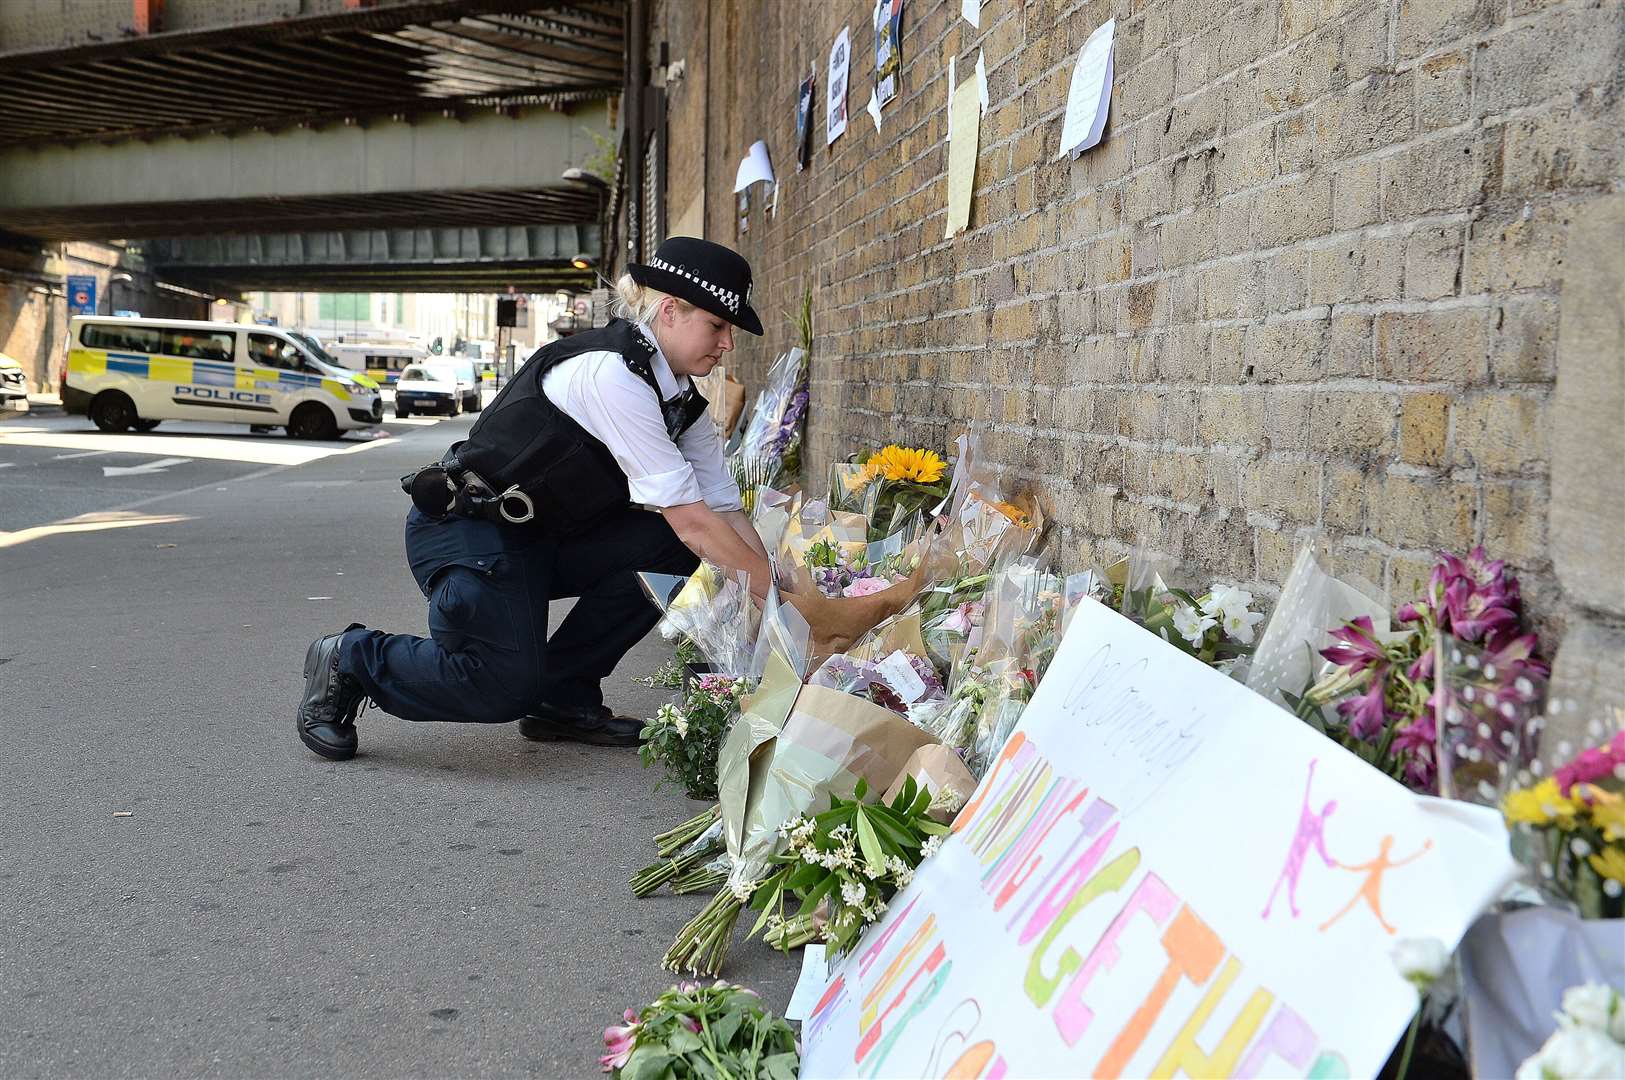 Flowers laid near the scene of the attack (John Stillwell/PA)